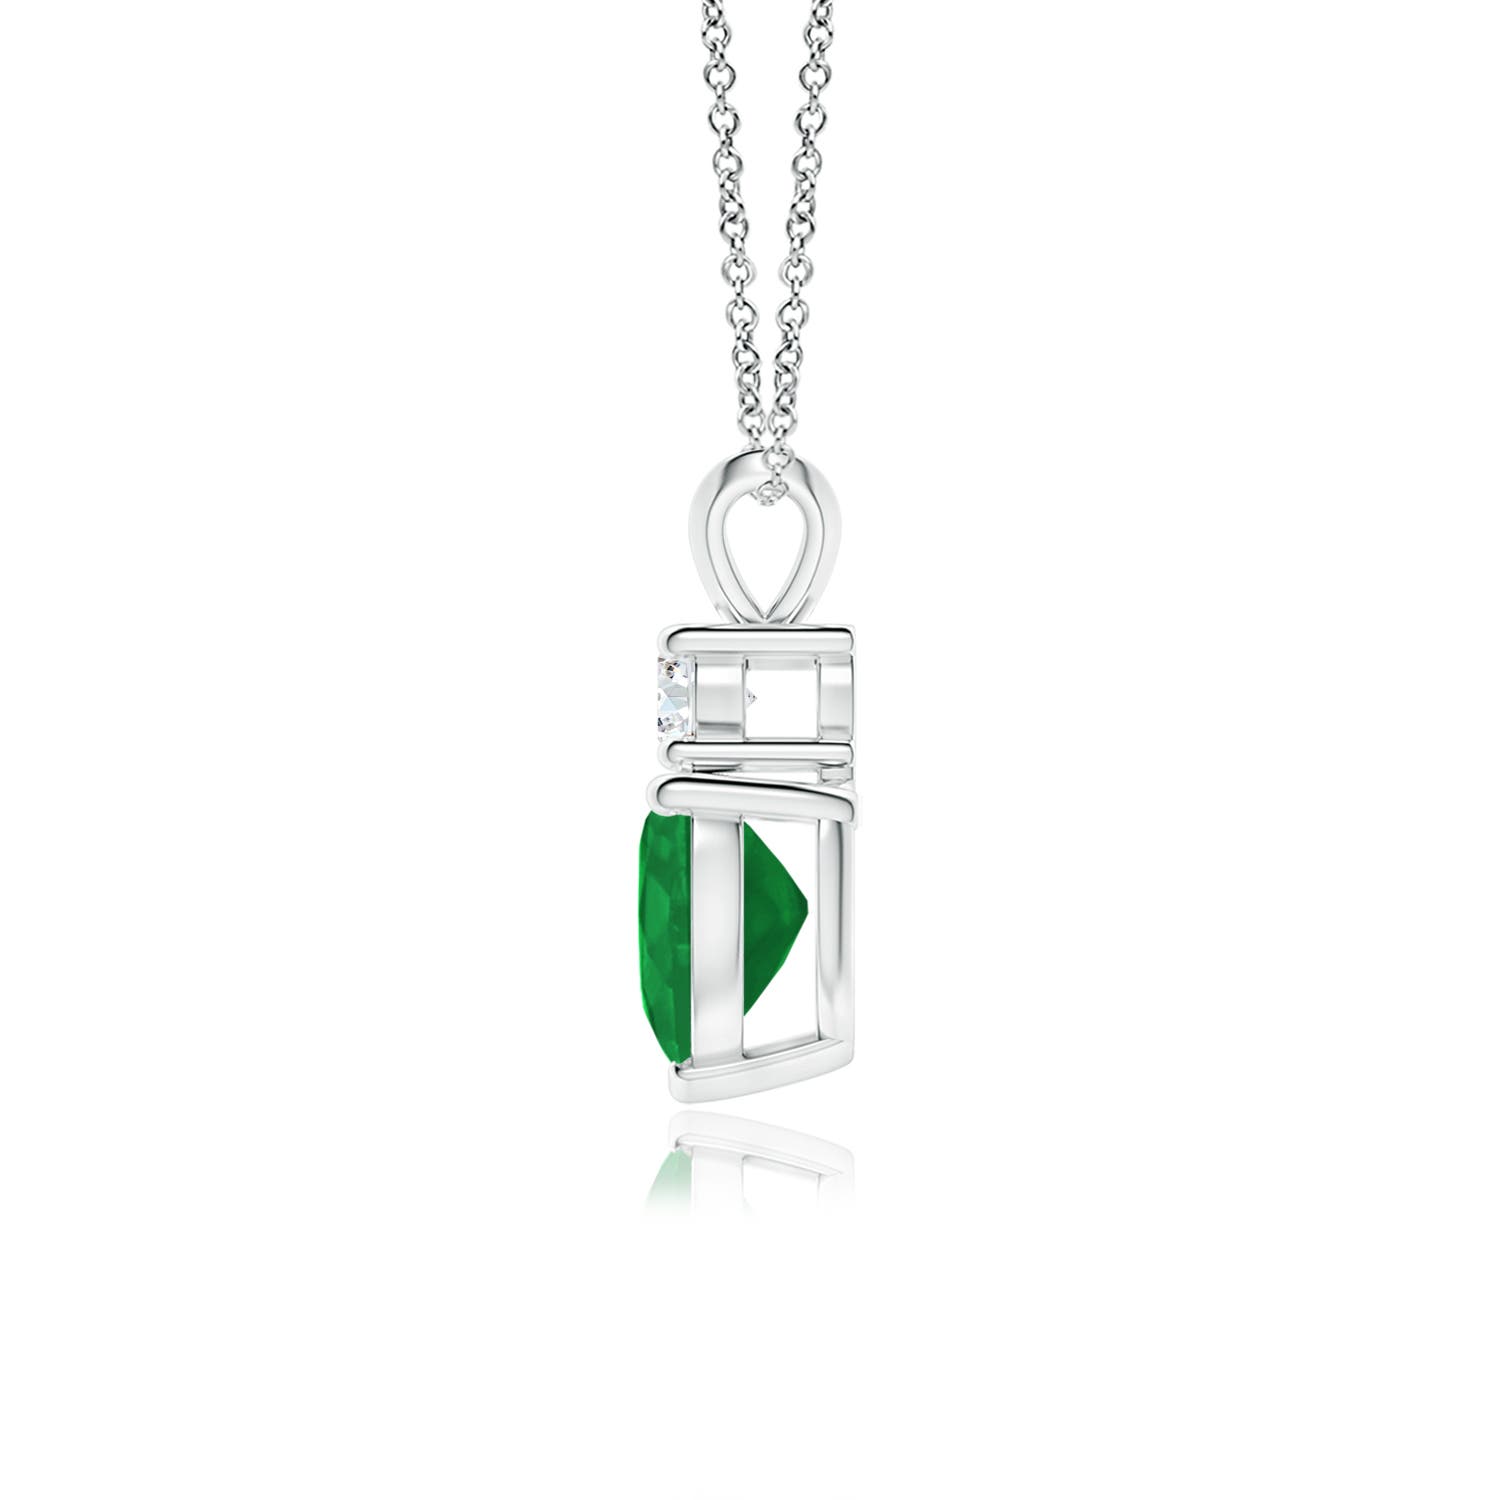 A - Emerald / 1.35 CT / 14 KT White Gold